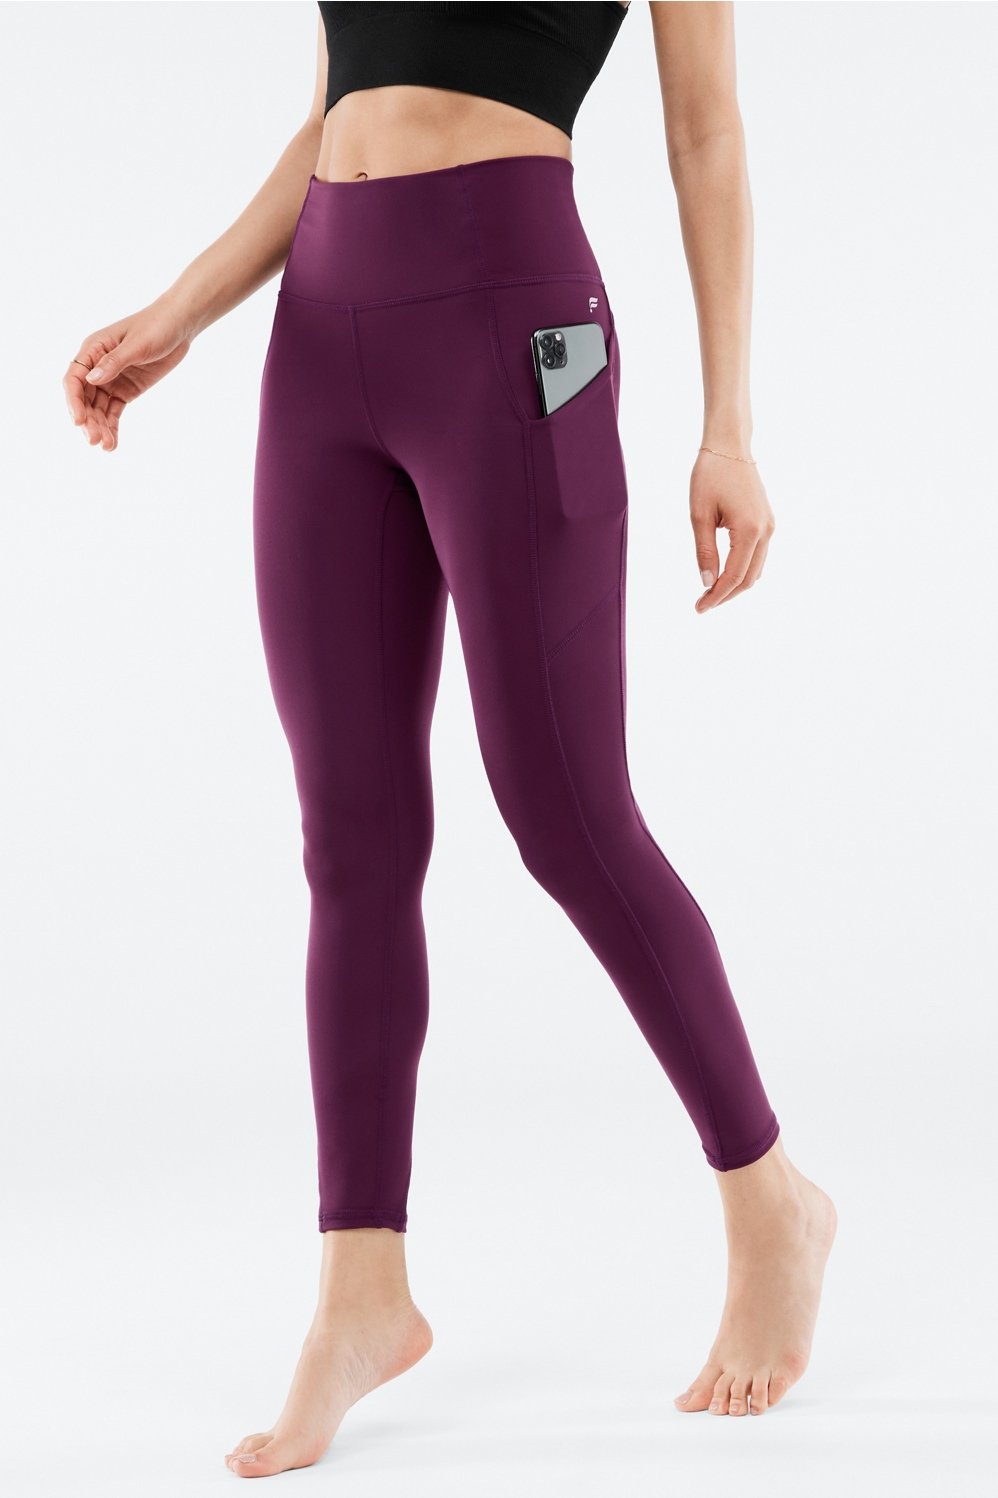 Fabletics Women's Oasis PureLuxe High-Waisted 7/8 Legging, Light  Compression, Buttery Soft, XXL, Blue : Buy Online at Best Price in KSA -  Souq is now : Fashion